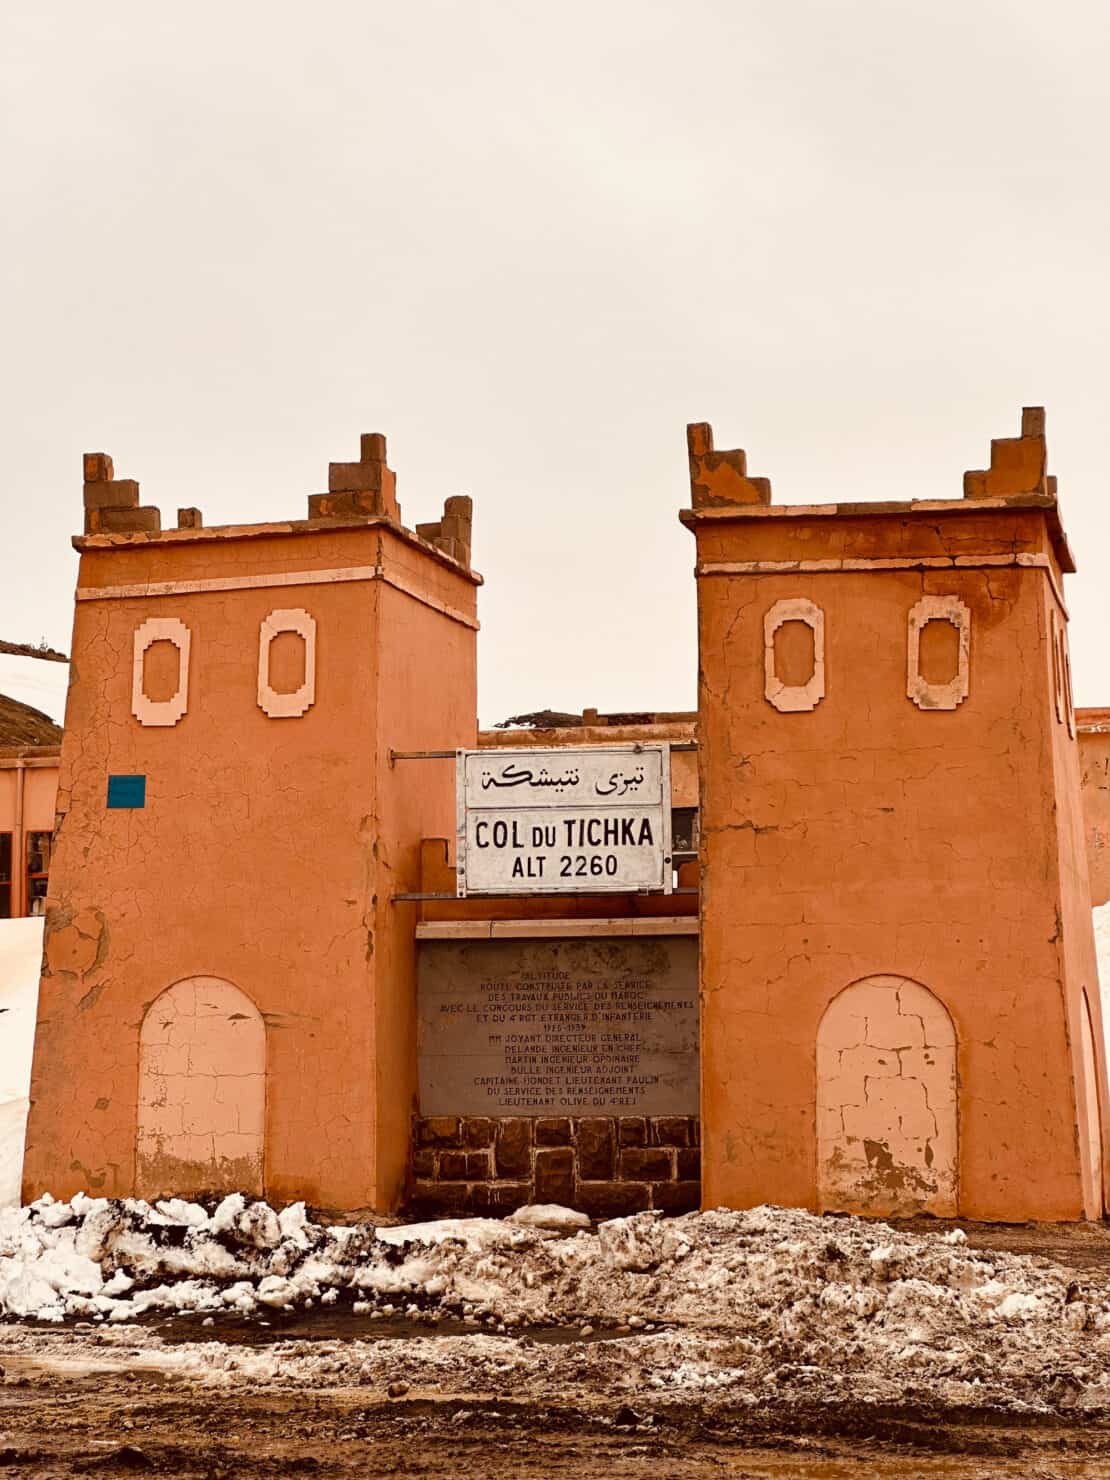 The Tichka pass building in the snow in the road back to Marrakech